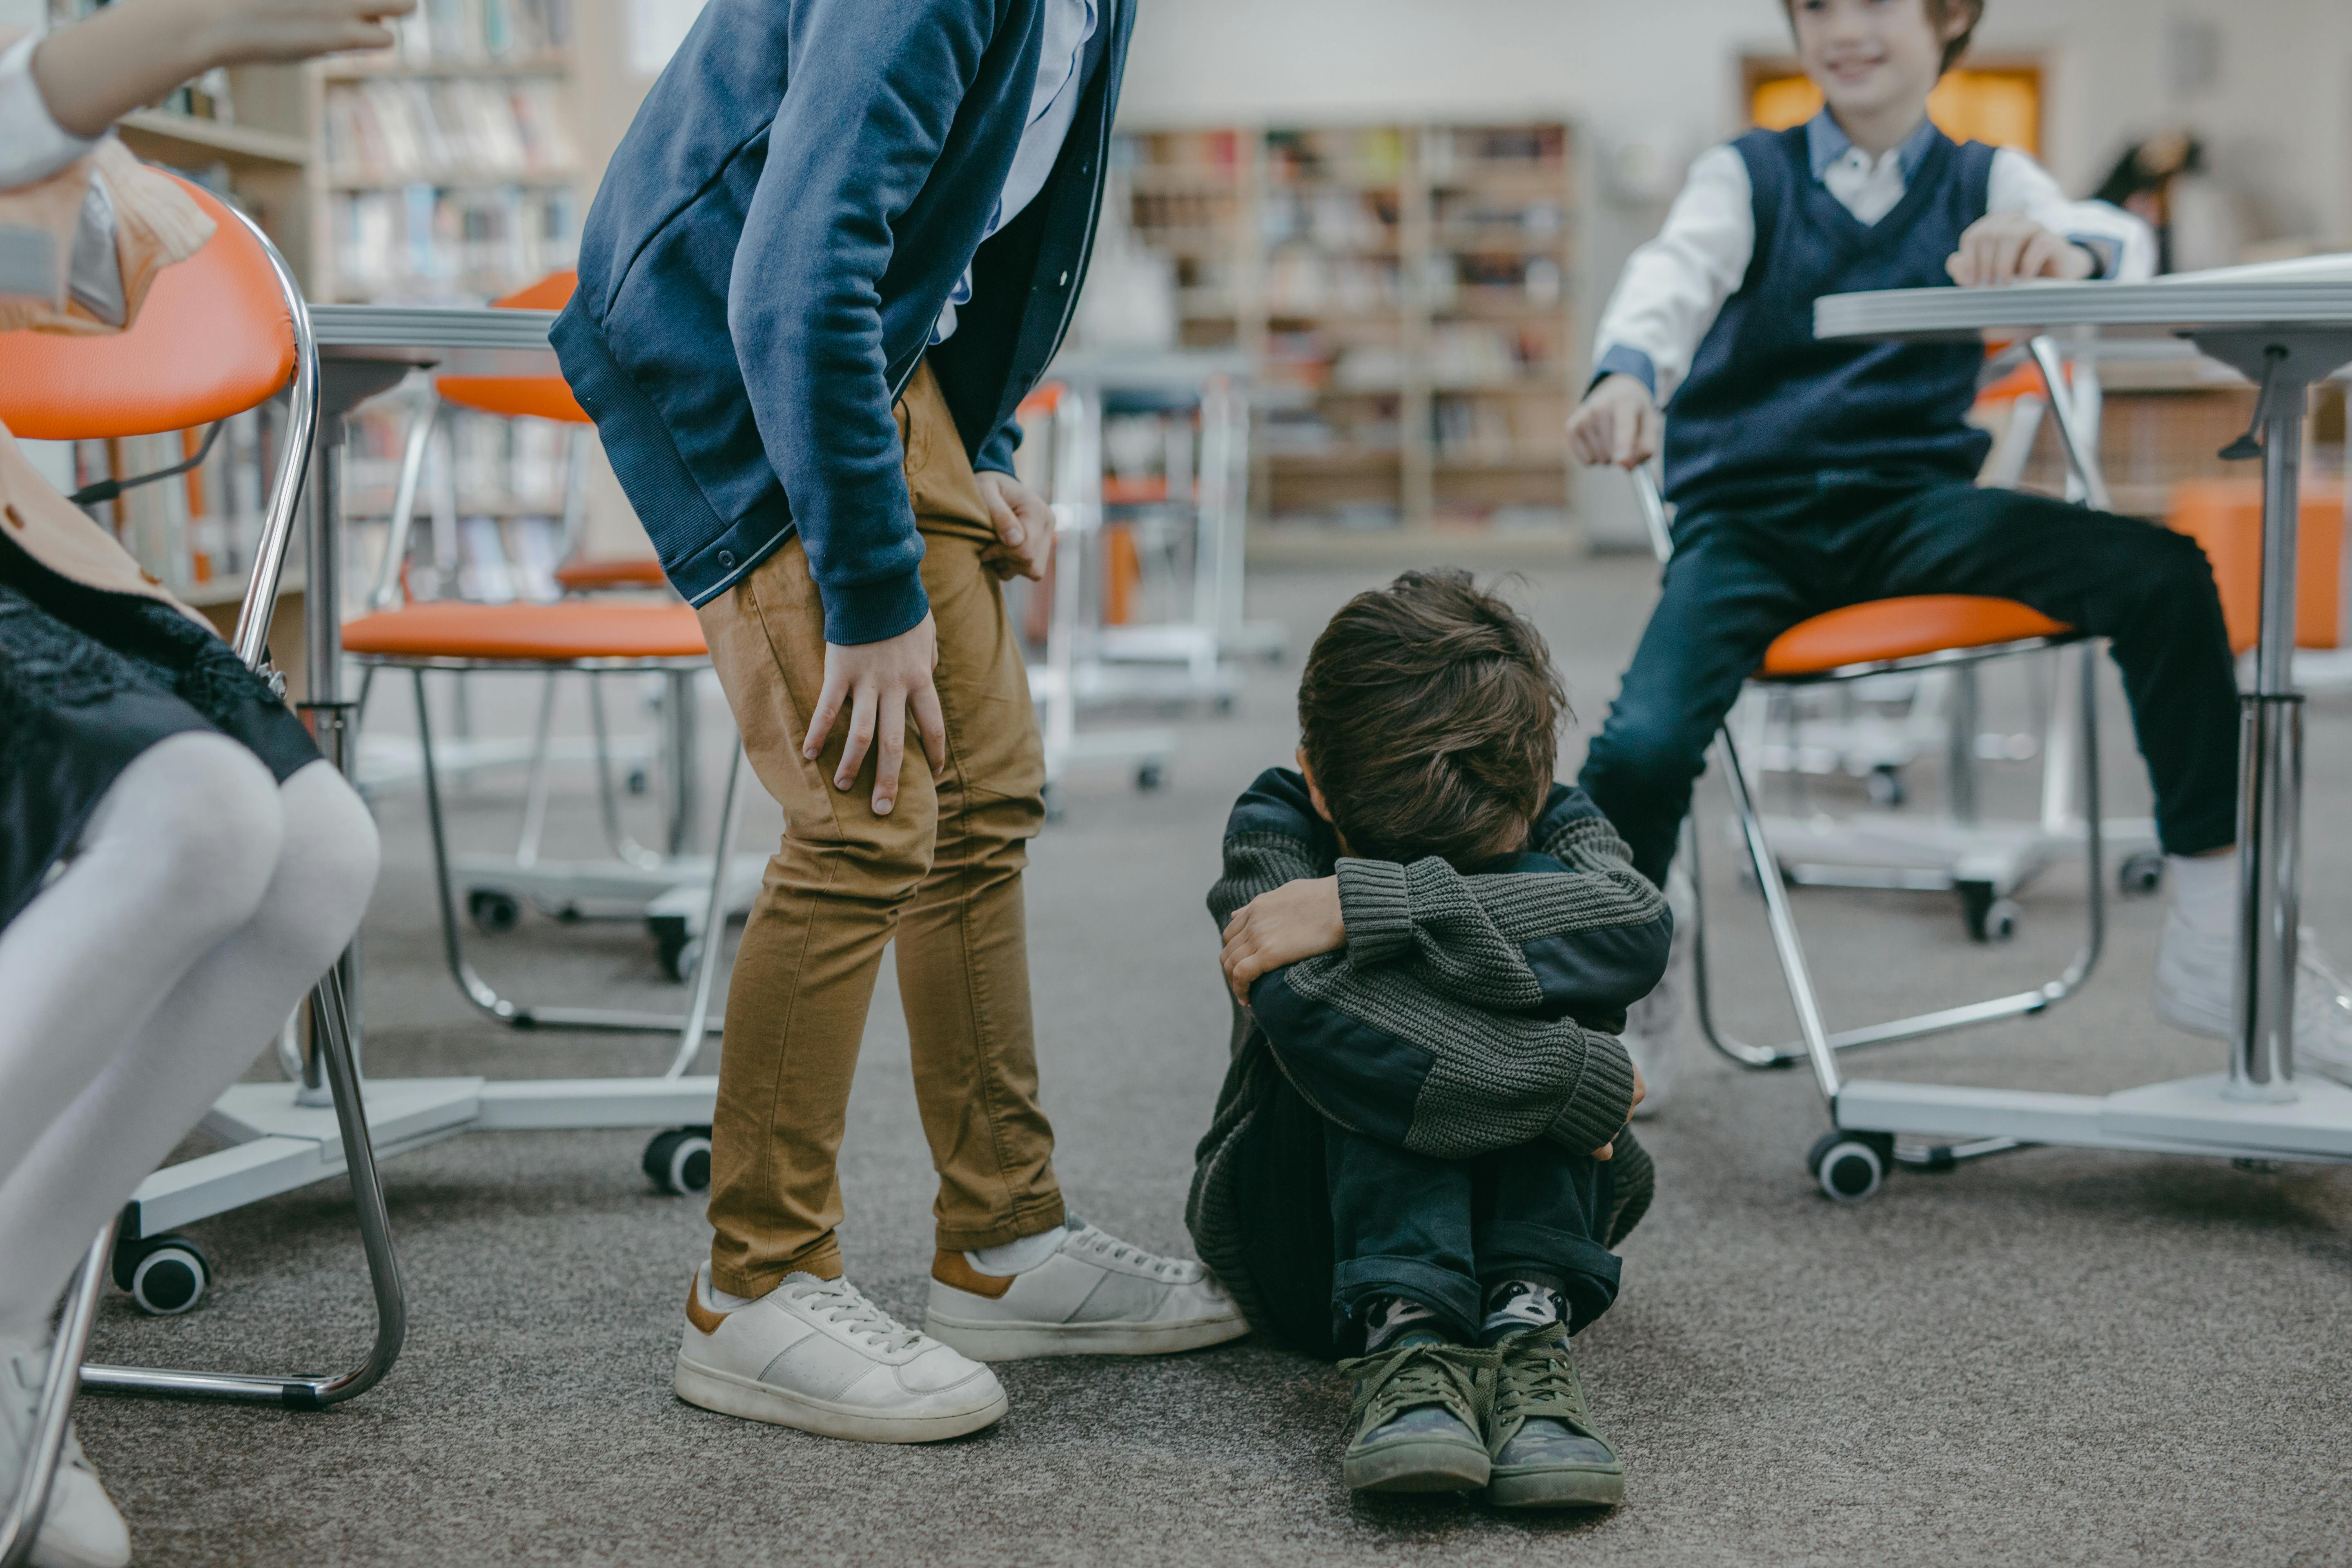 A boy bullying another child at school | Source: Pexels